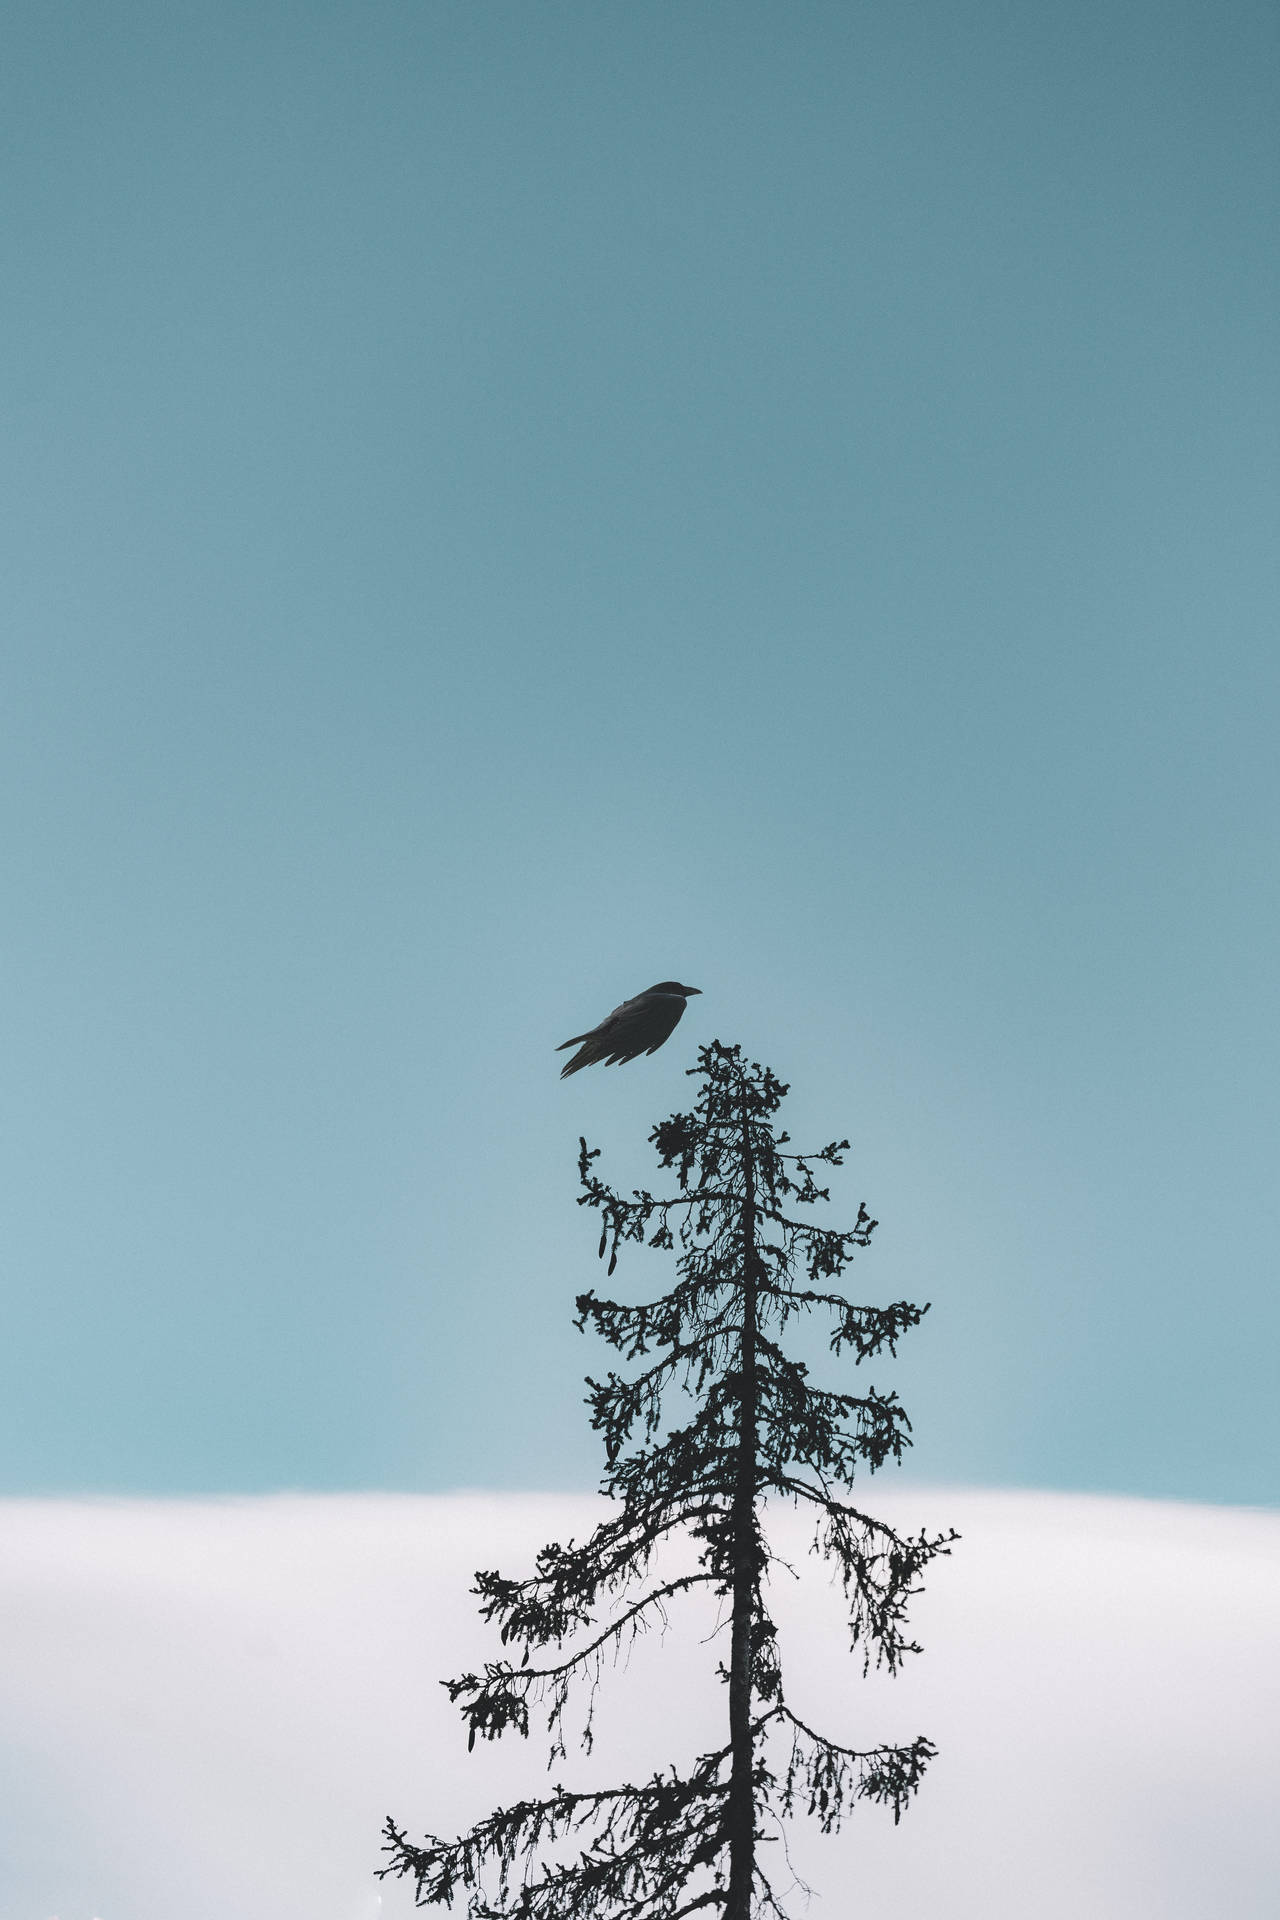 Coolest Iphone Small Black Bird Background